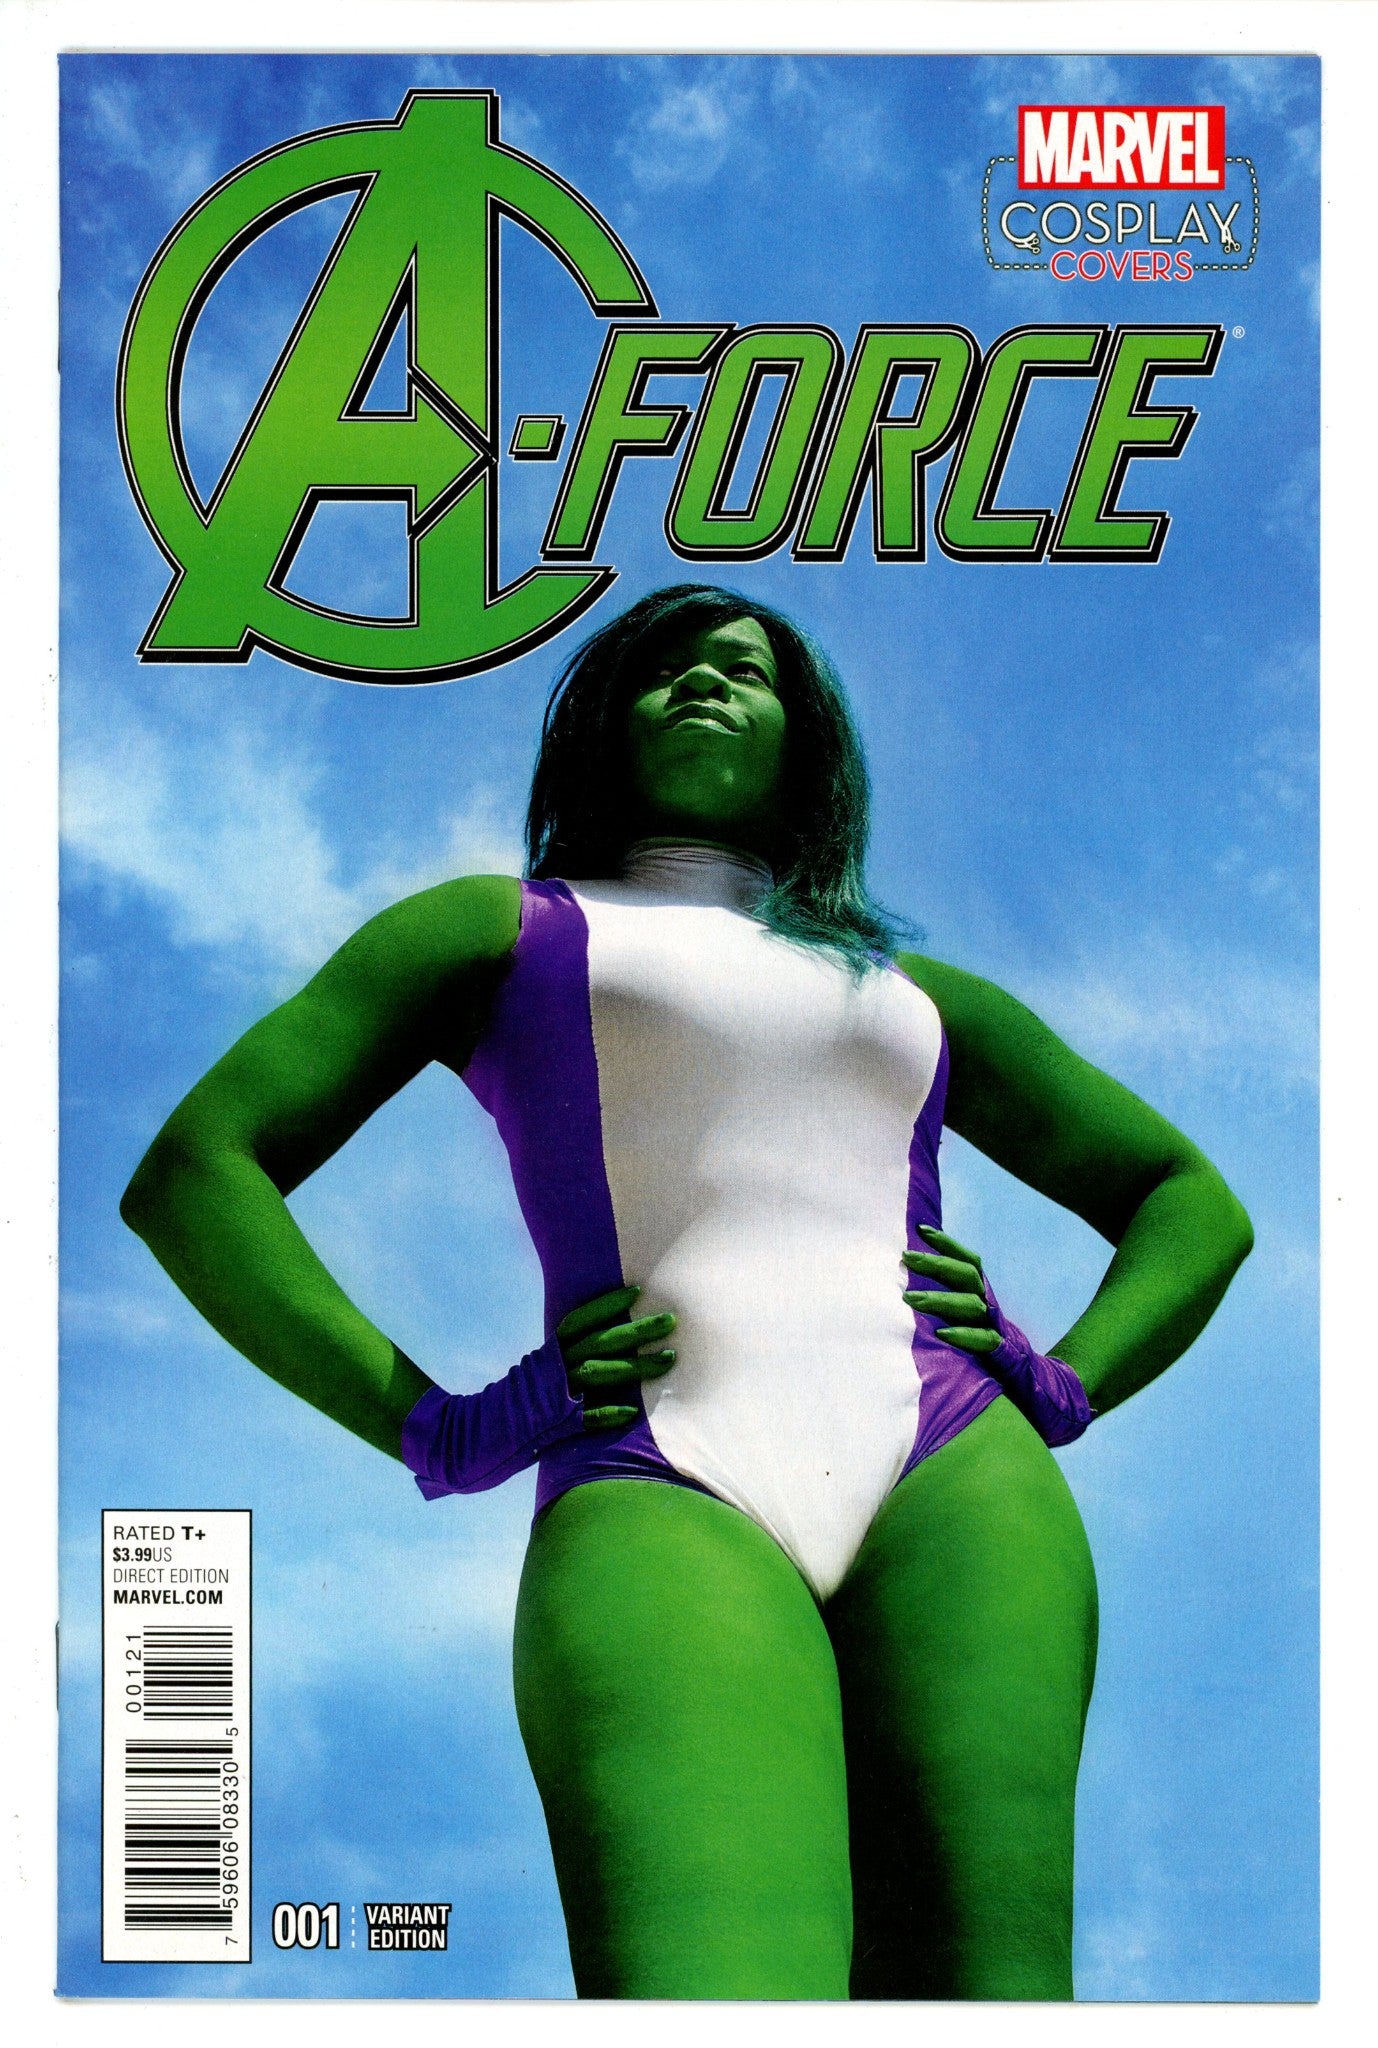 A-Force Vol 2 1 Cosplay Photo Variant